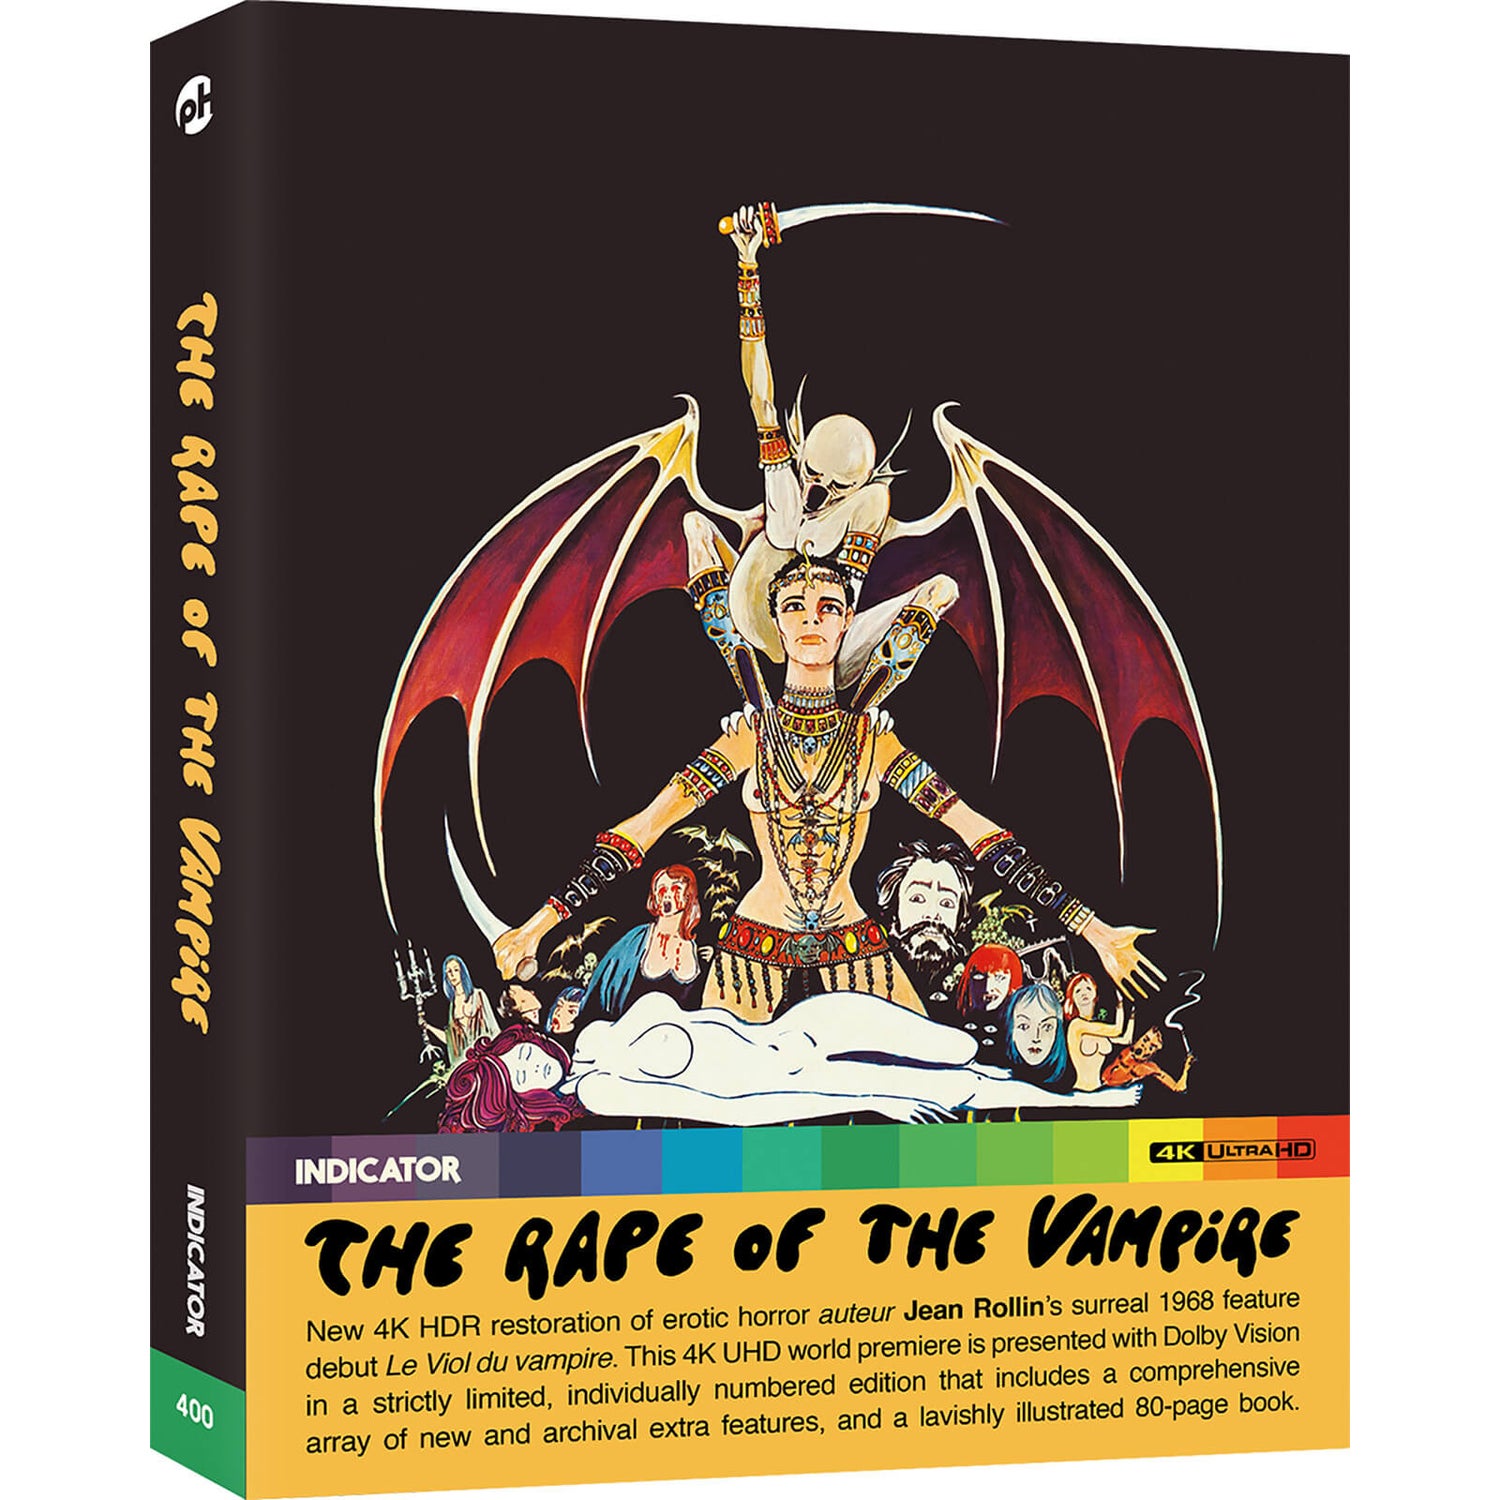 The Rape Of The Vampire - Limited Edition 4K Ultra HD